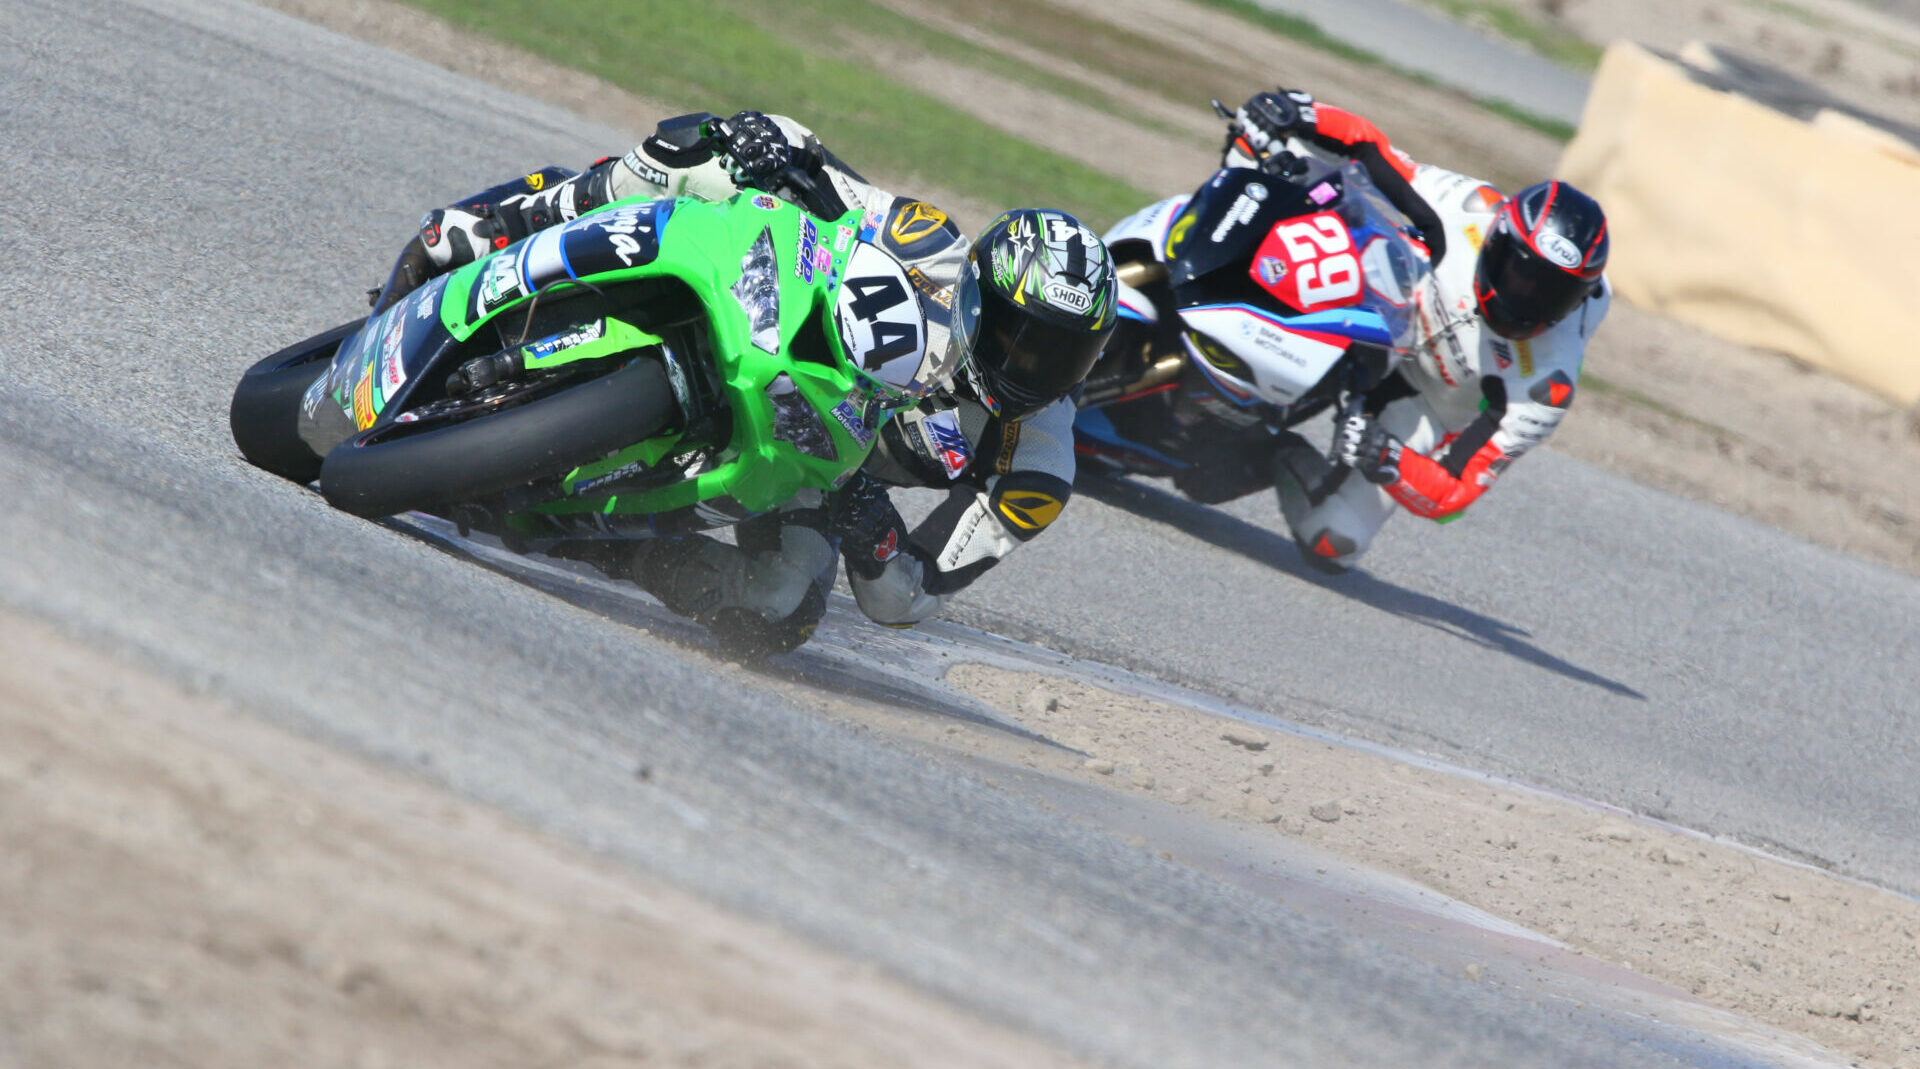 Brenden Ketelsen (44) and Jack Bakken (29) doing battle in the RiderzLaw Gold Cup race at Round One of the 2022 CRA season. Photo by CaliPhotography.com, courtesy CRA.